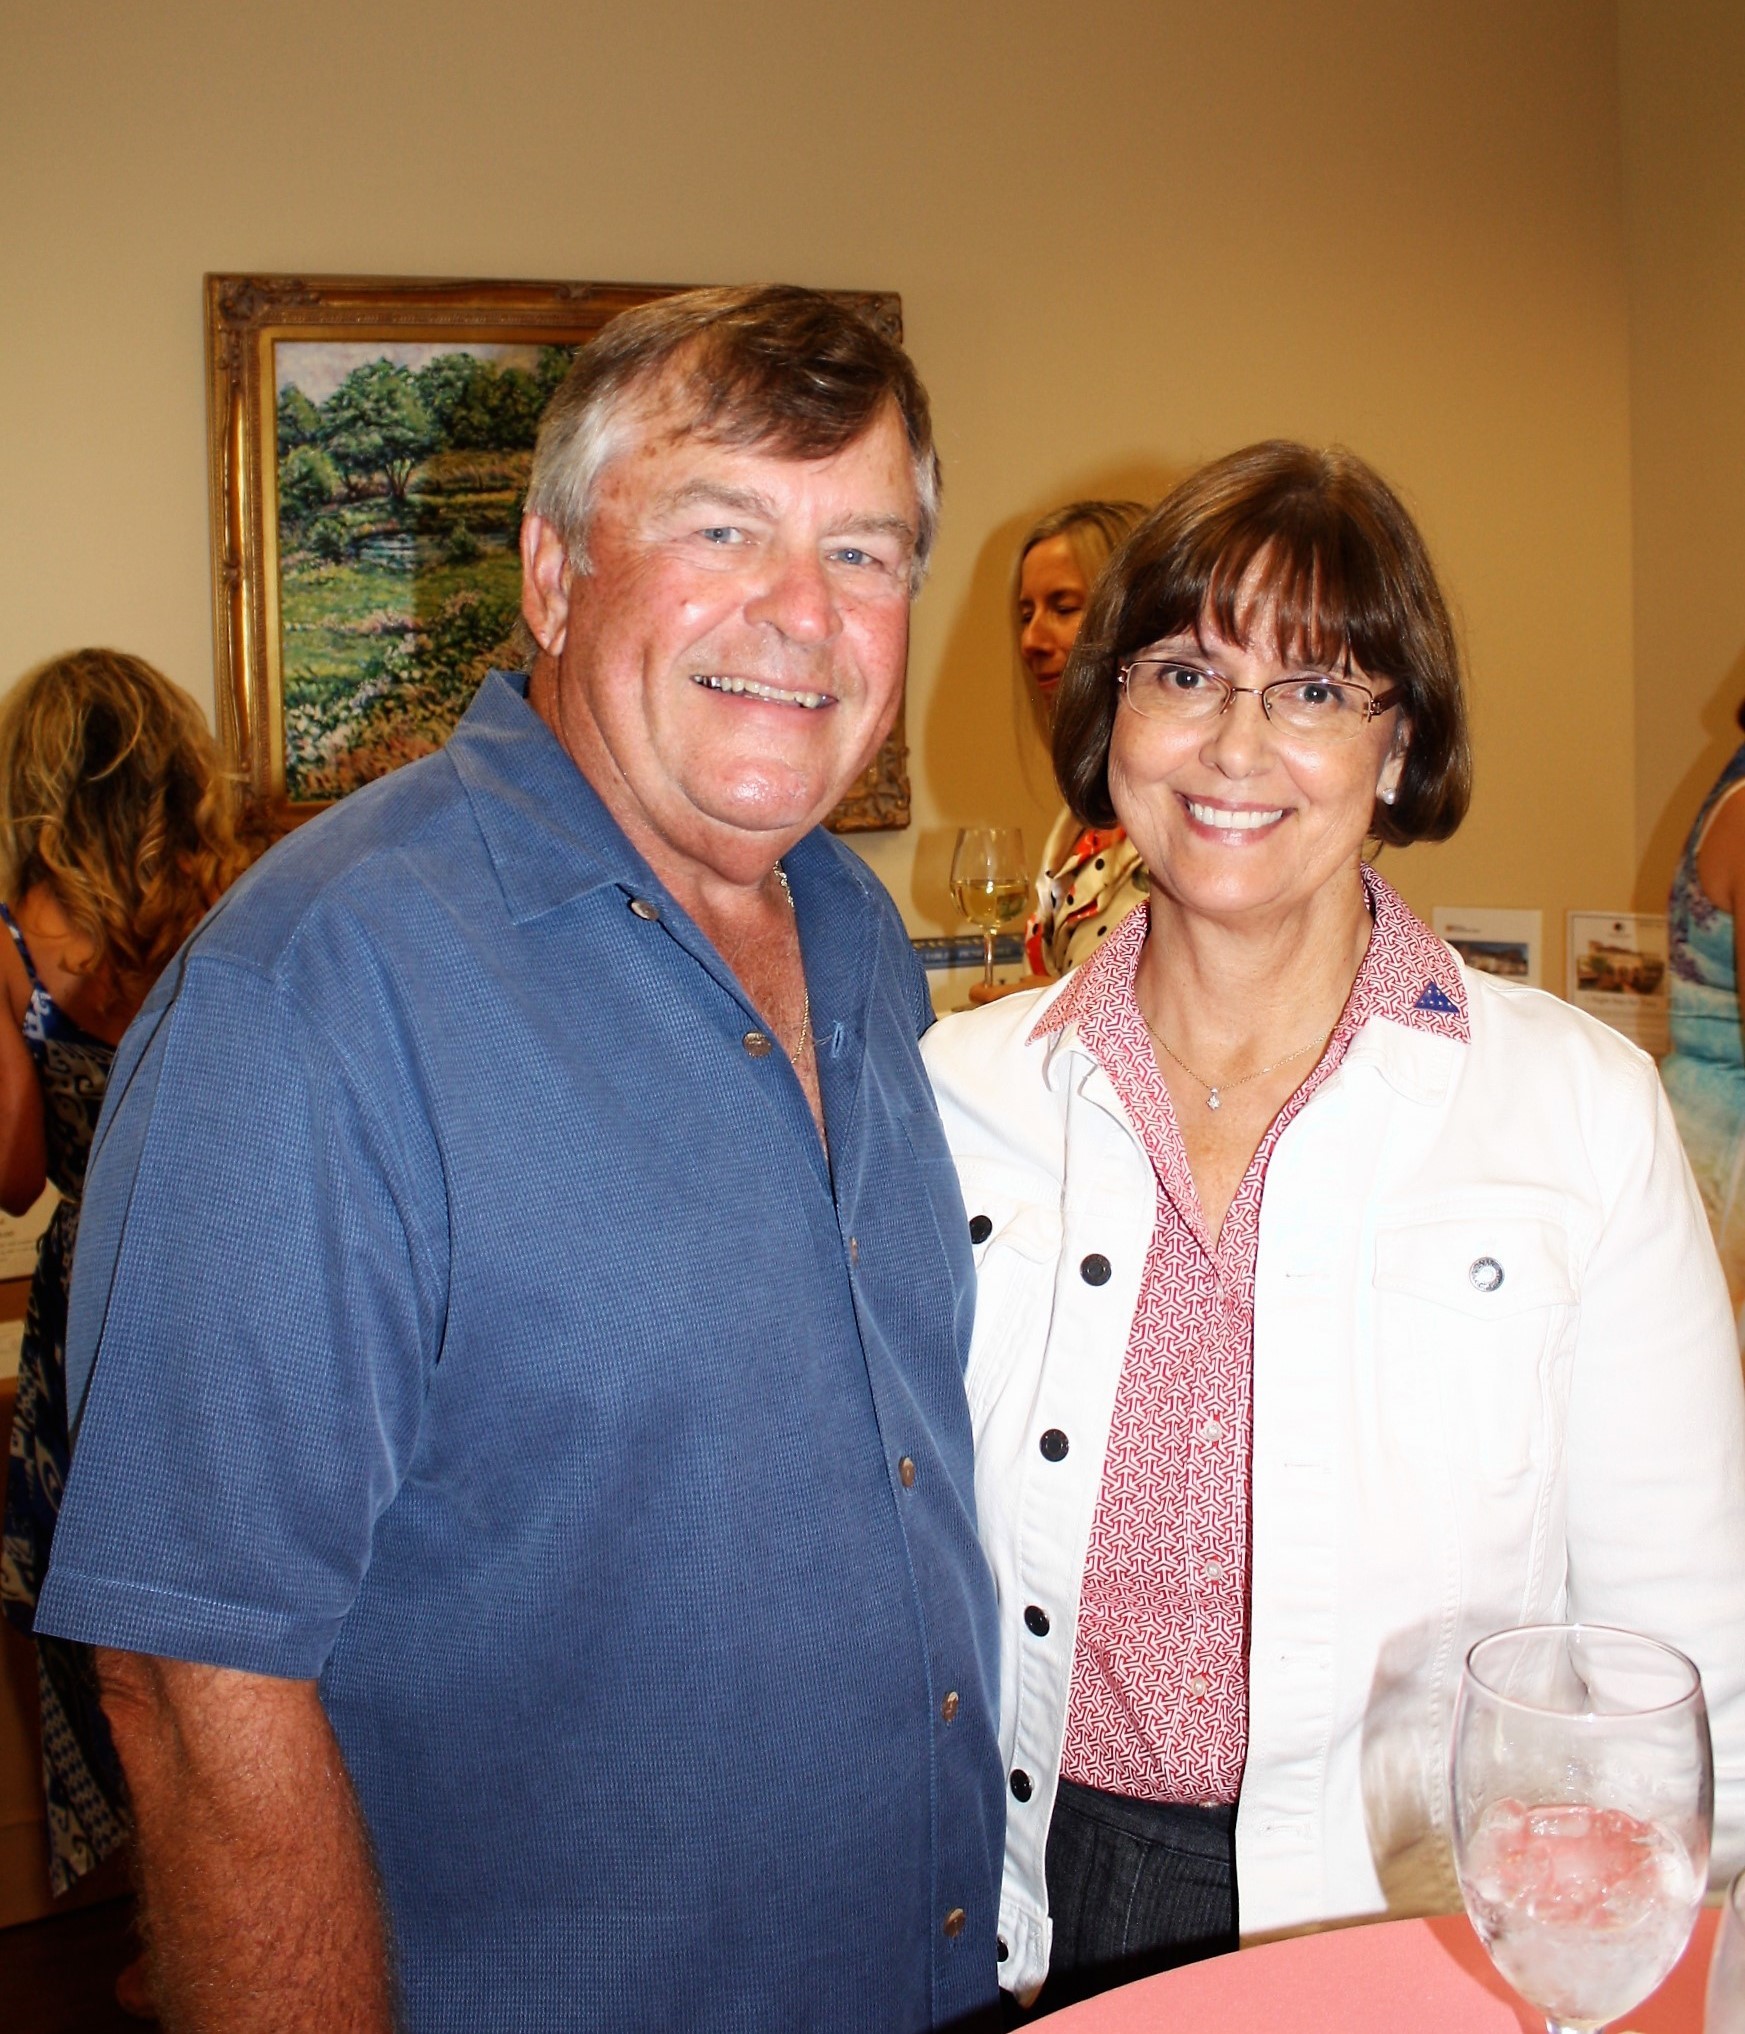 Henry Dean and state Rep. Cyndi Stevenson